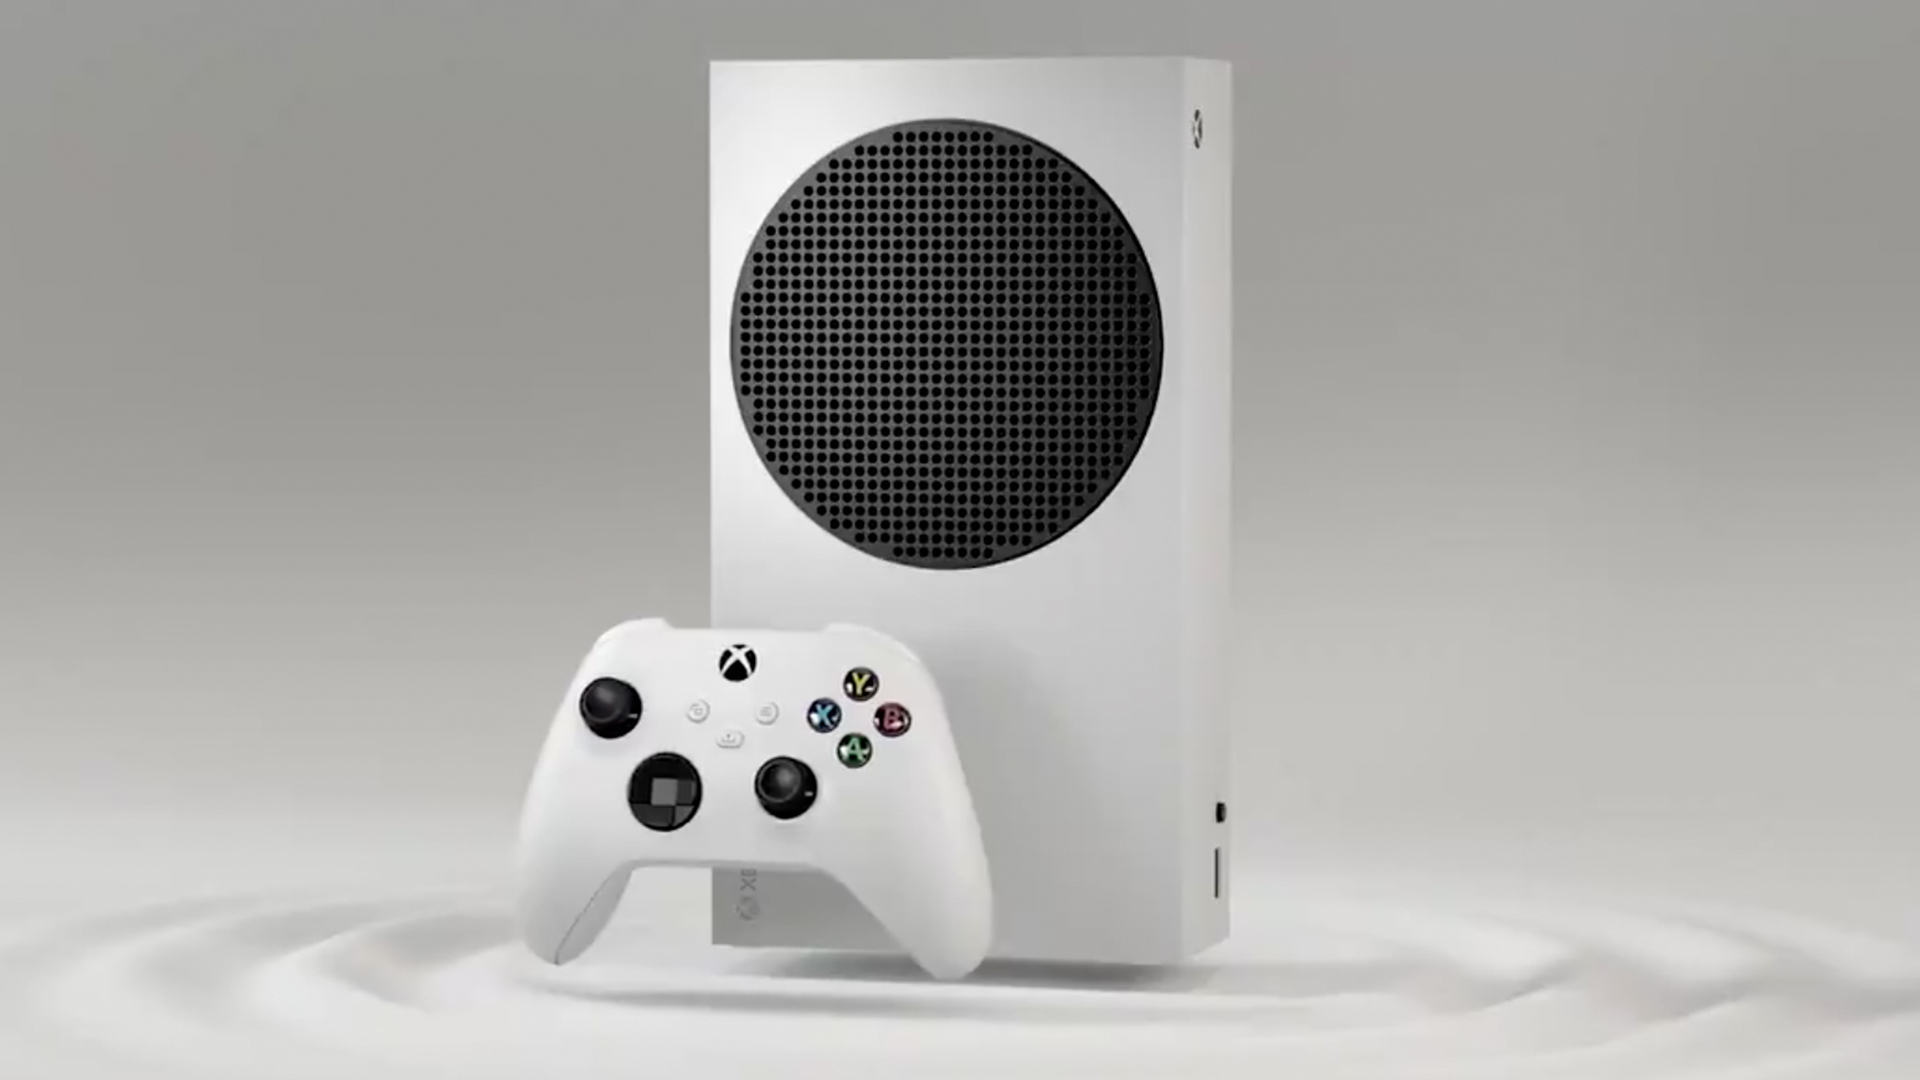 Xbox Series S Gaming Console Available At Discounted Price In